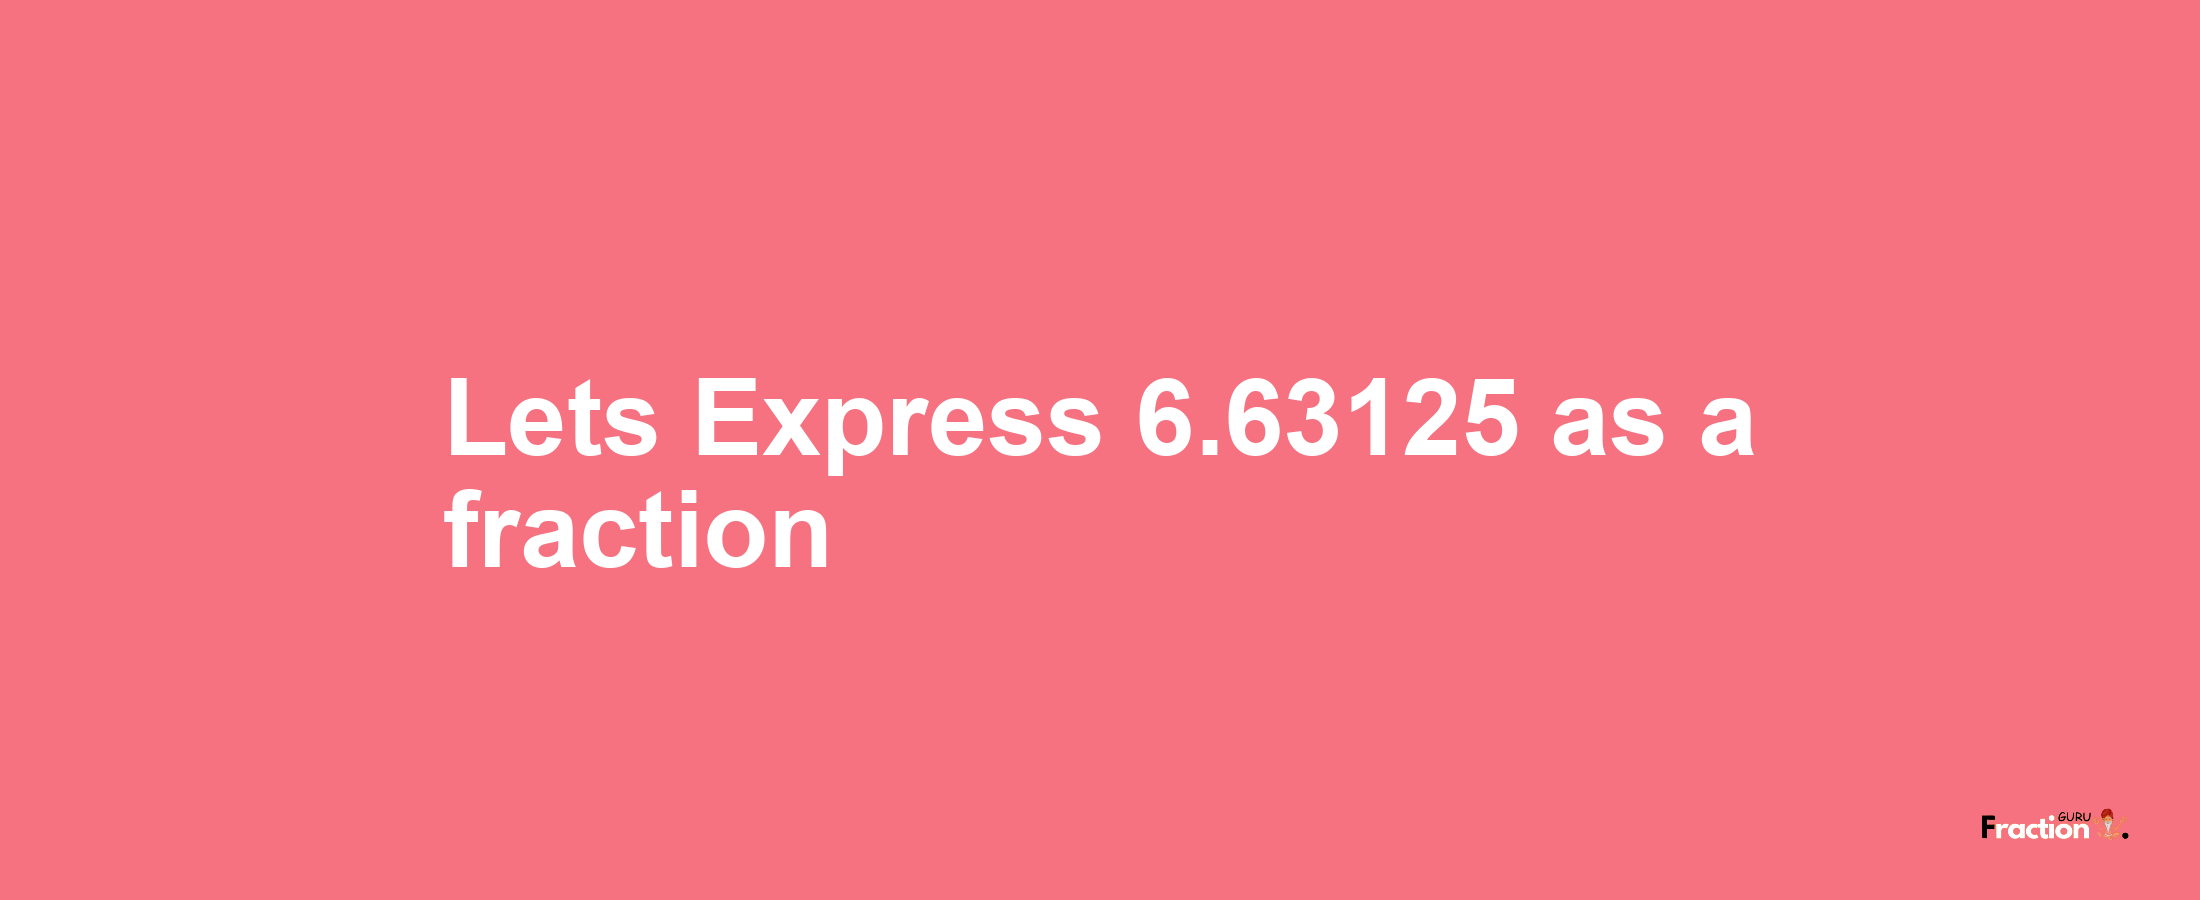 Lets Express 6.63125 as afraction